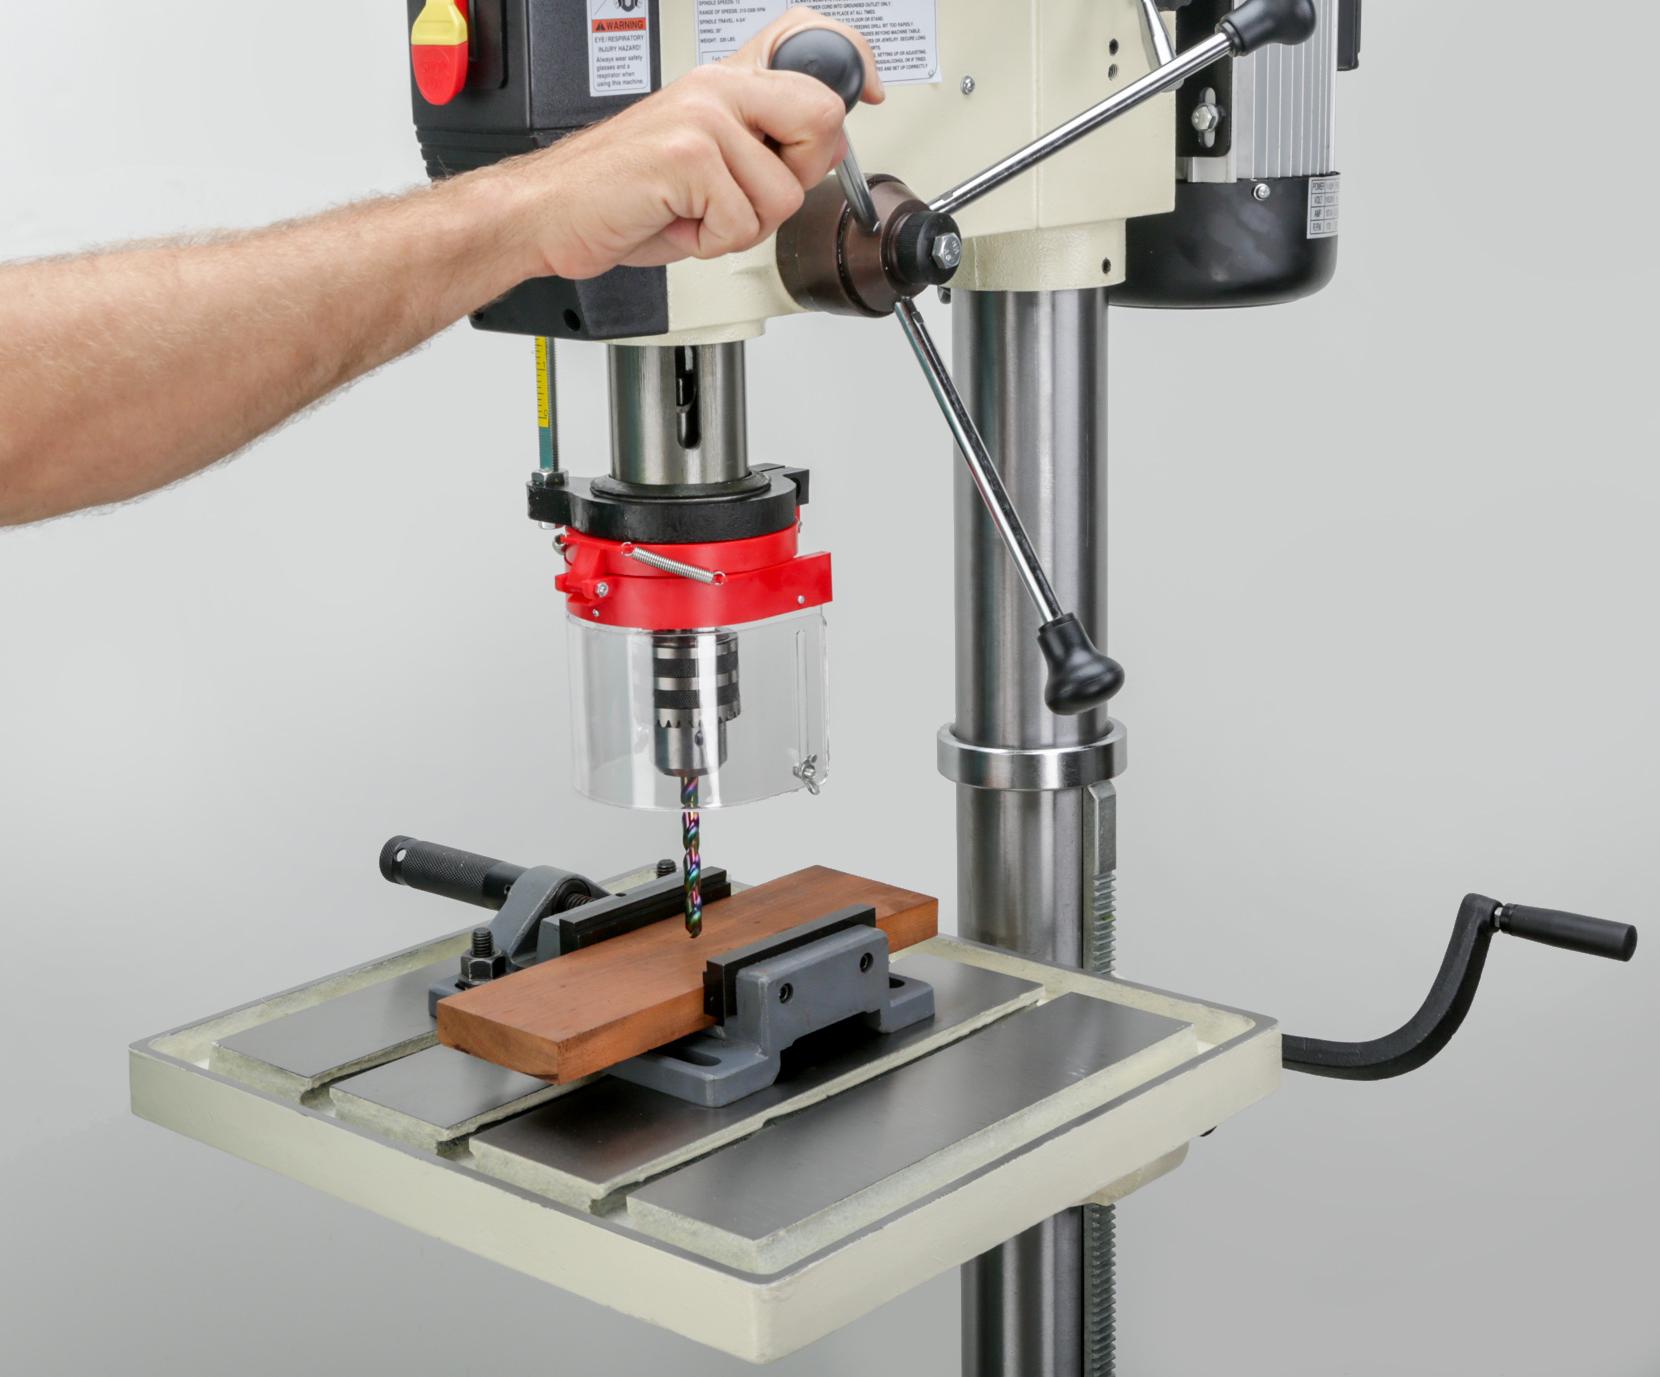 Why drill press machines are used?